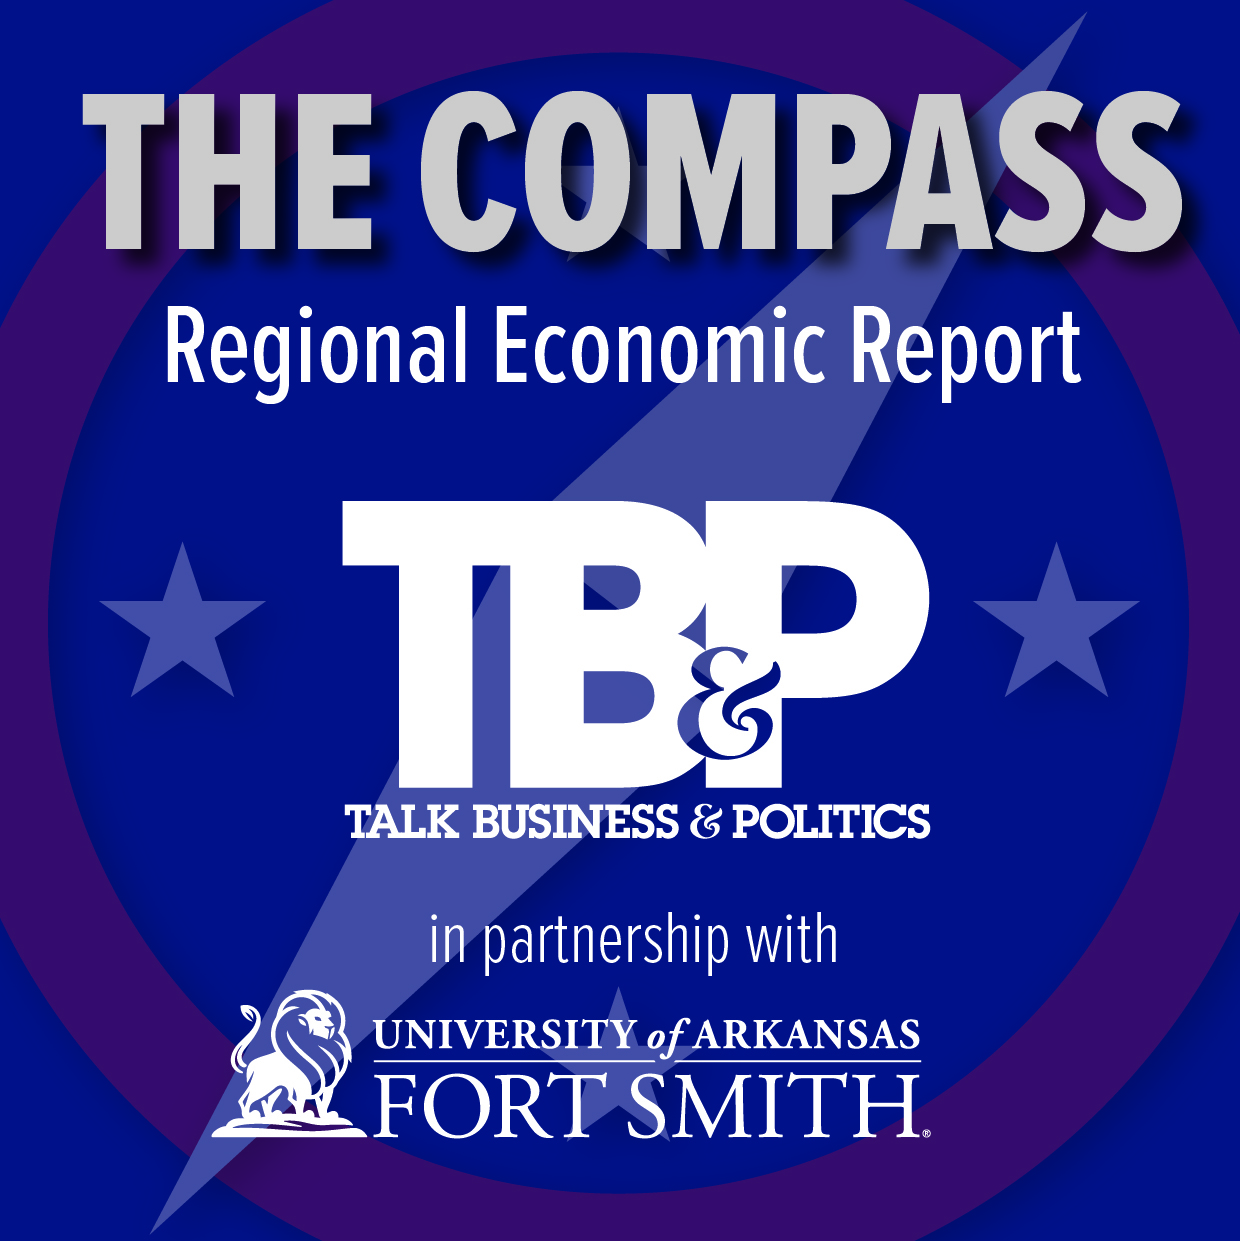 The Compass Report